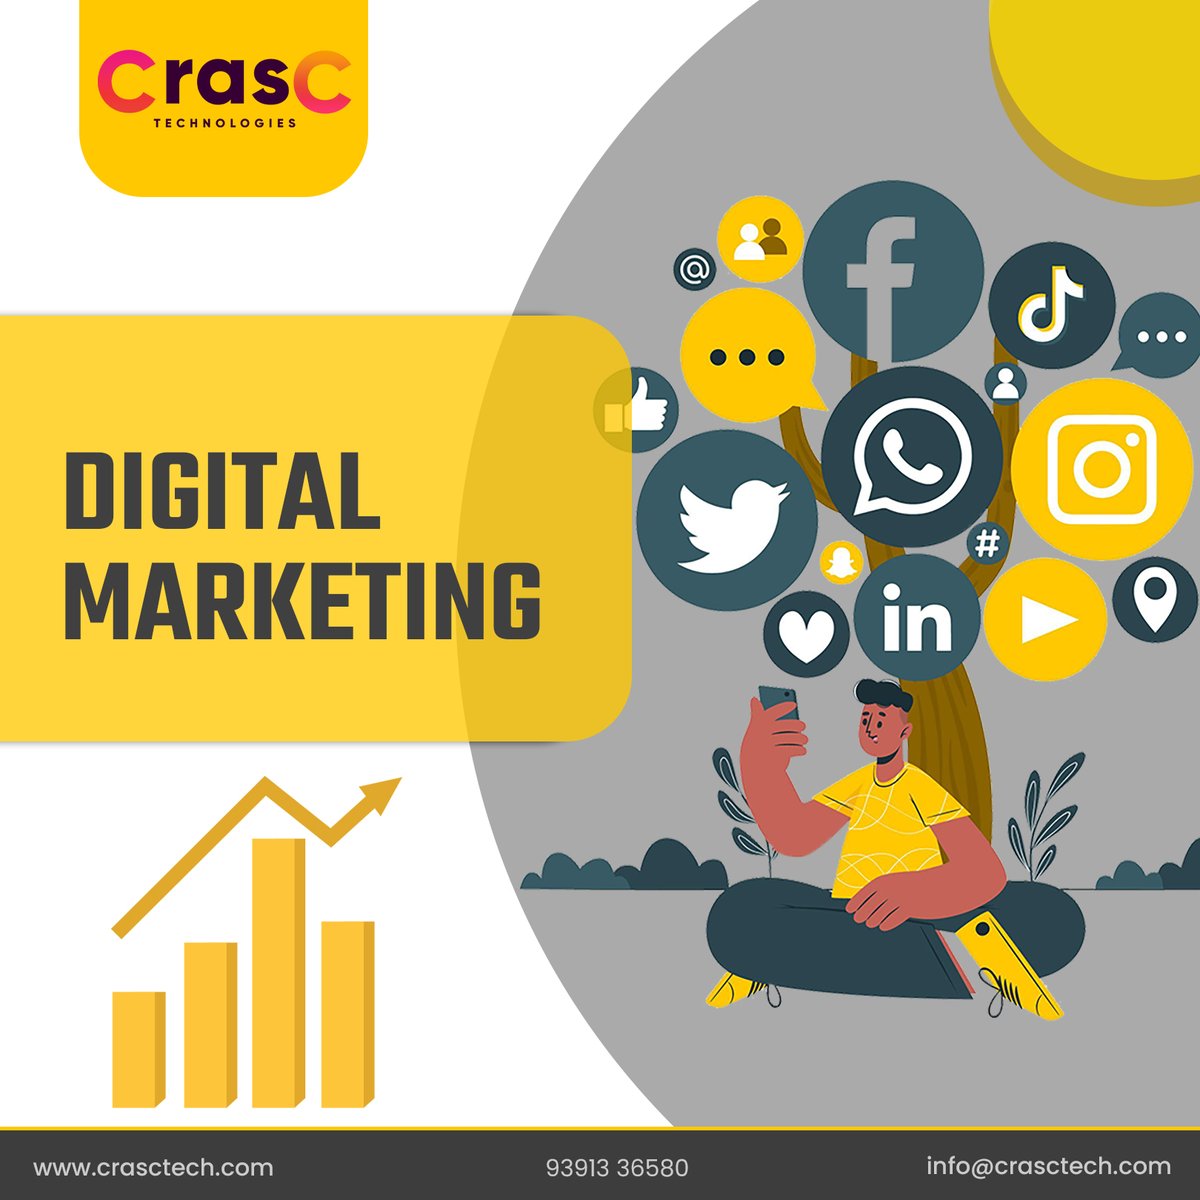 💻🚀 'Boost your brand's visibility and reach with Crasctech's cutting-edge digital marketing solutions! 🌟📈 #crasctech #digitalmarketing #socialmediamarketing #digitalmarketingtips #digitalmarketingexpert #digitalmarketingagency #graphicdesigner #videoediting